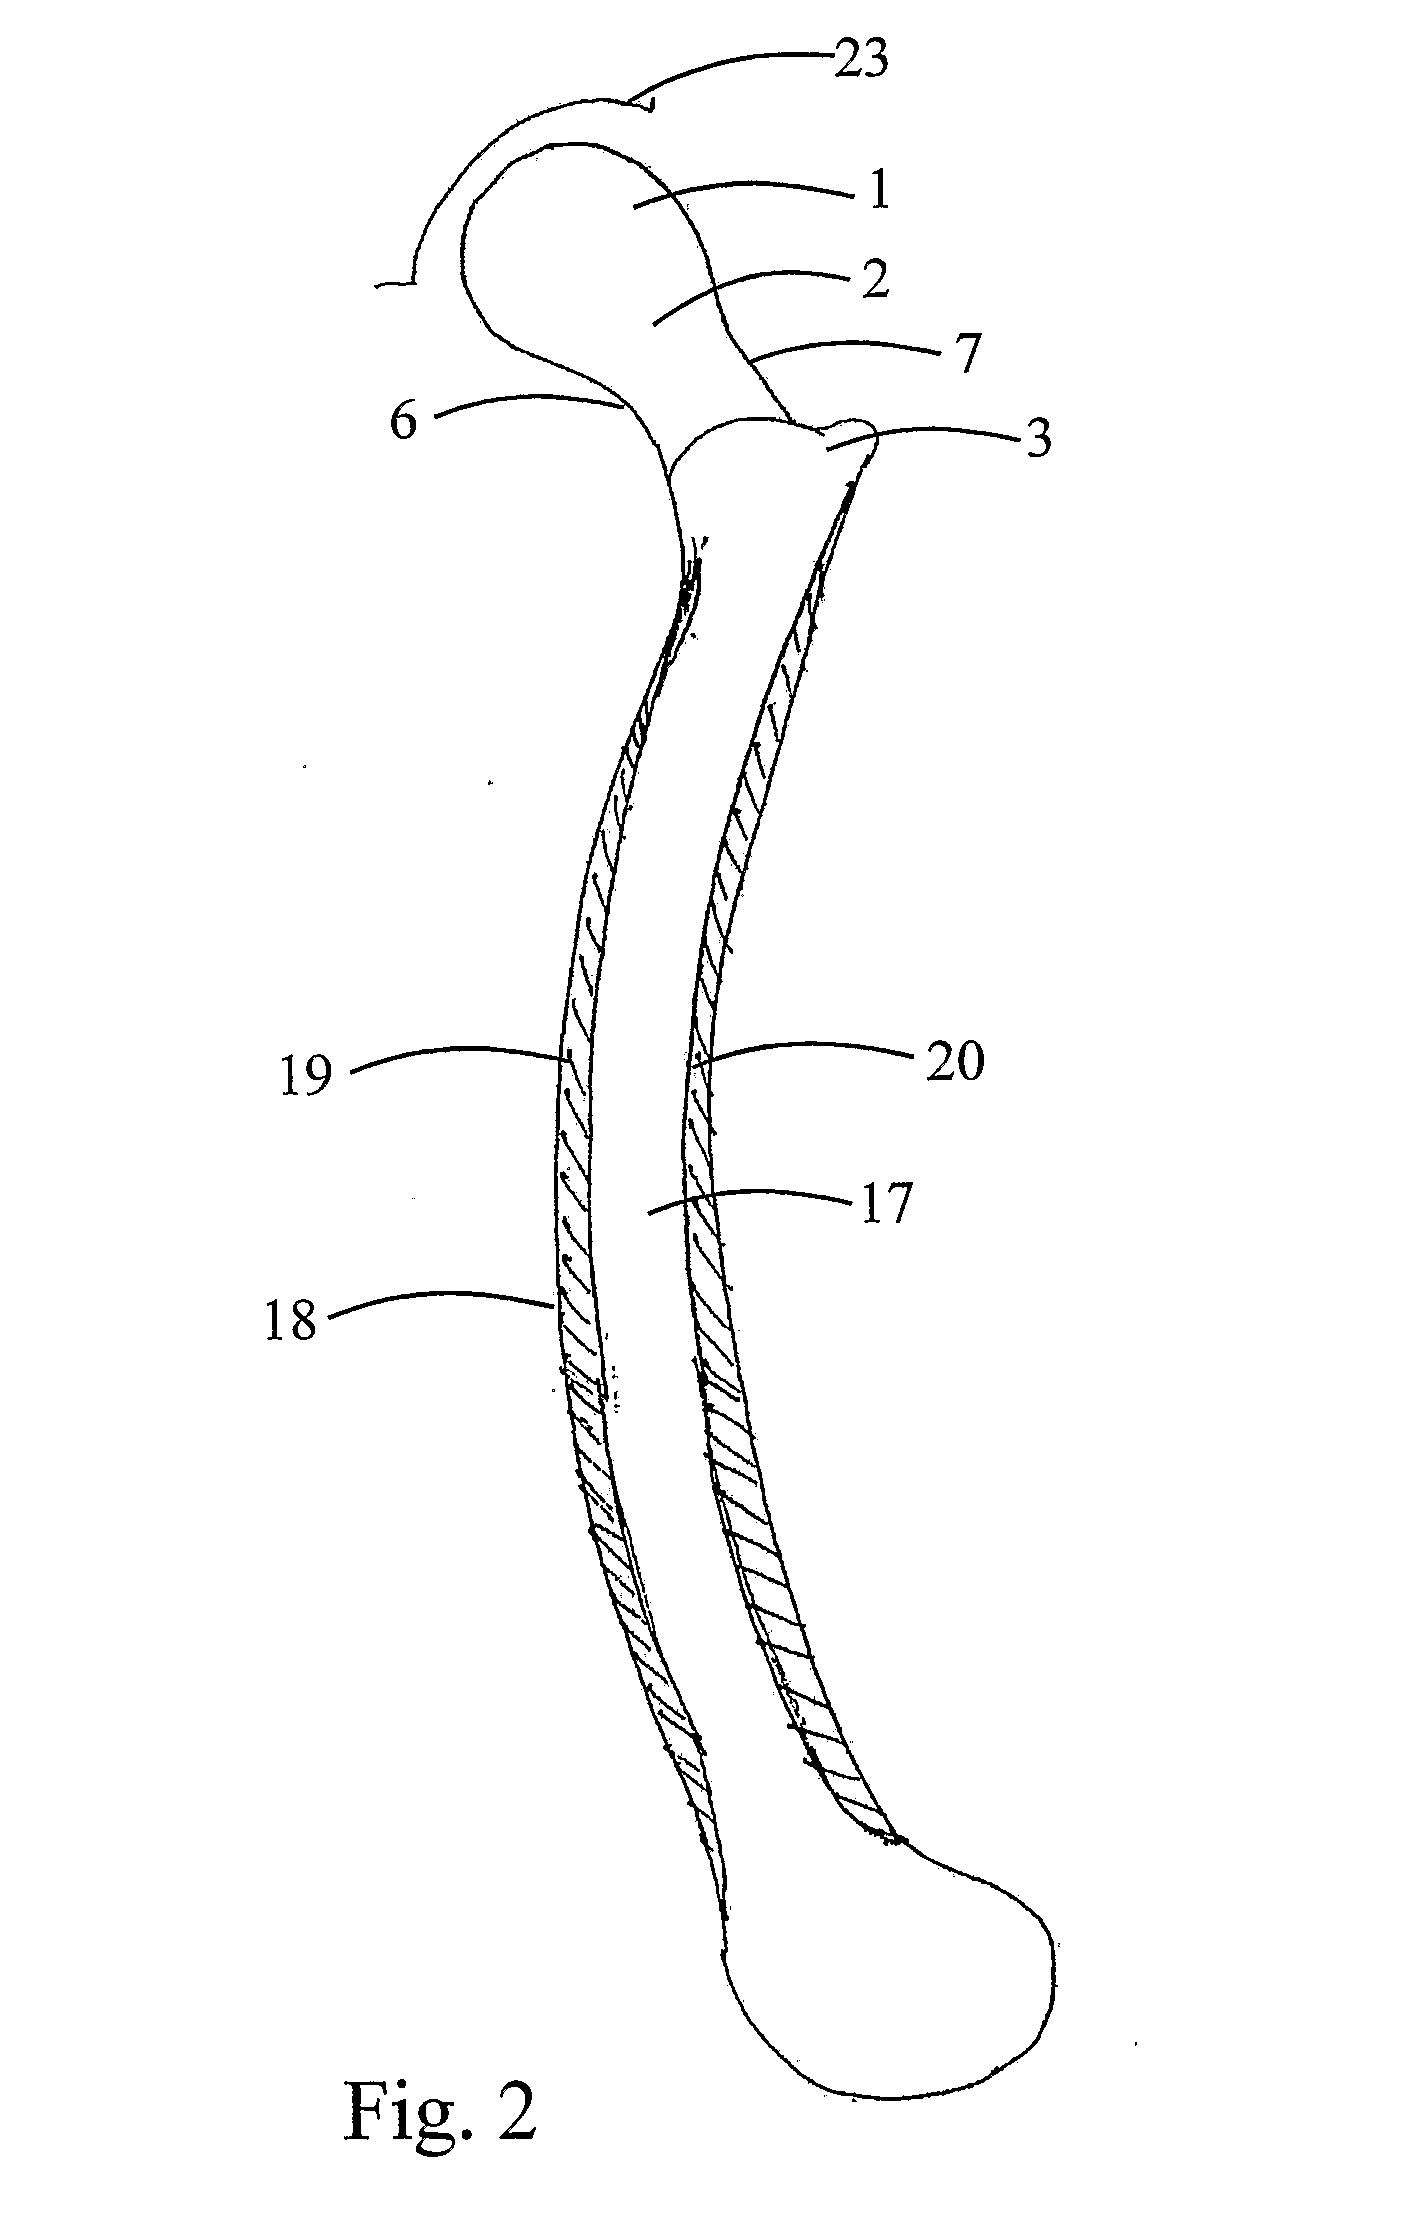 Implant assembly for proximal femoral fracture